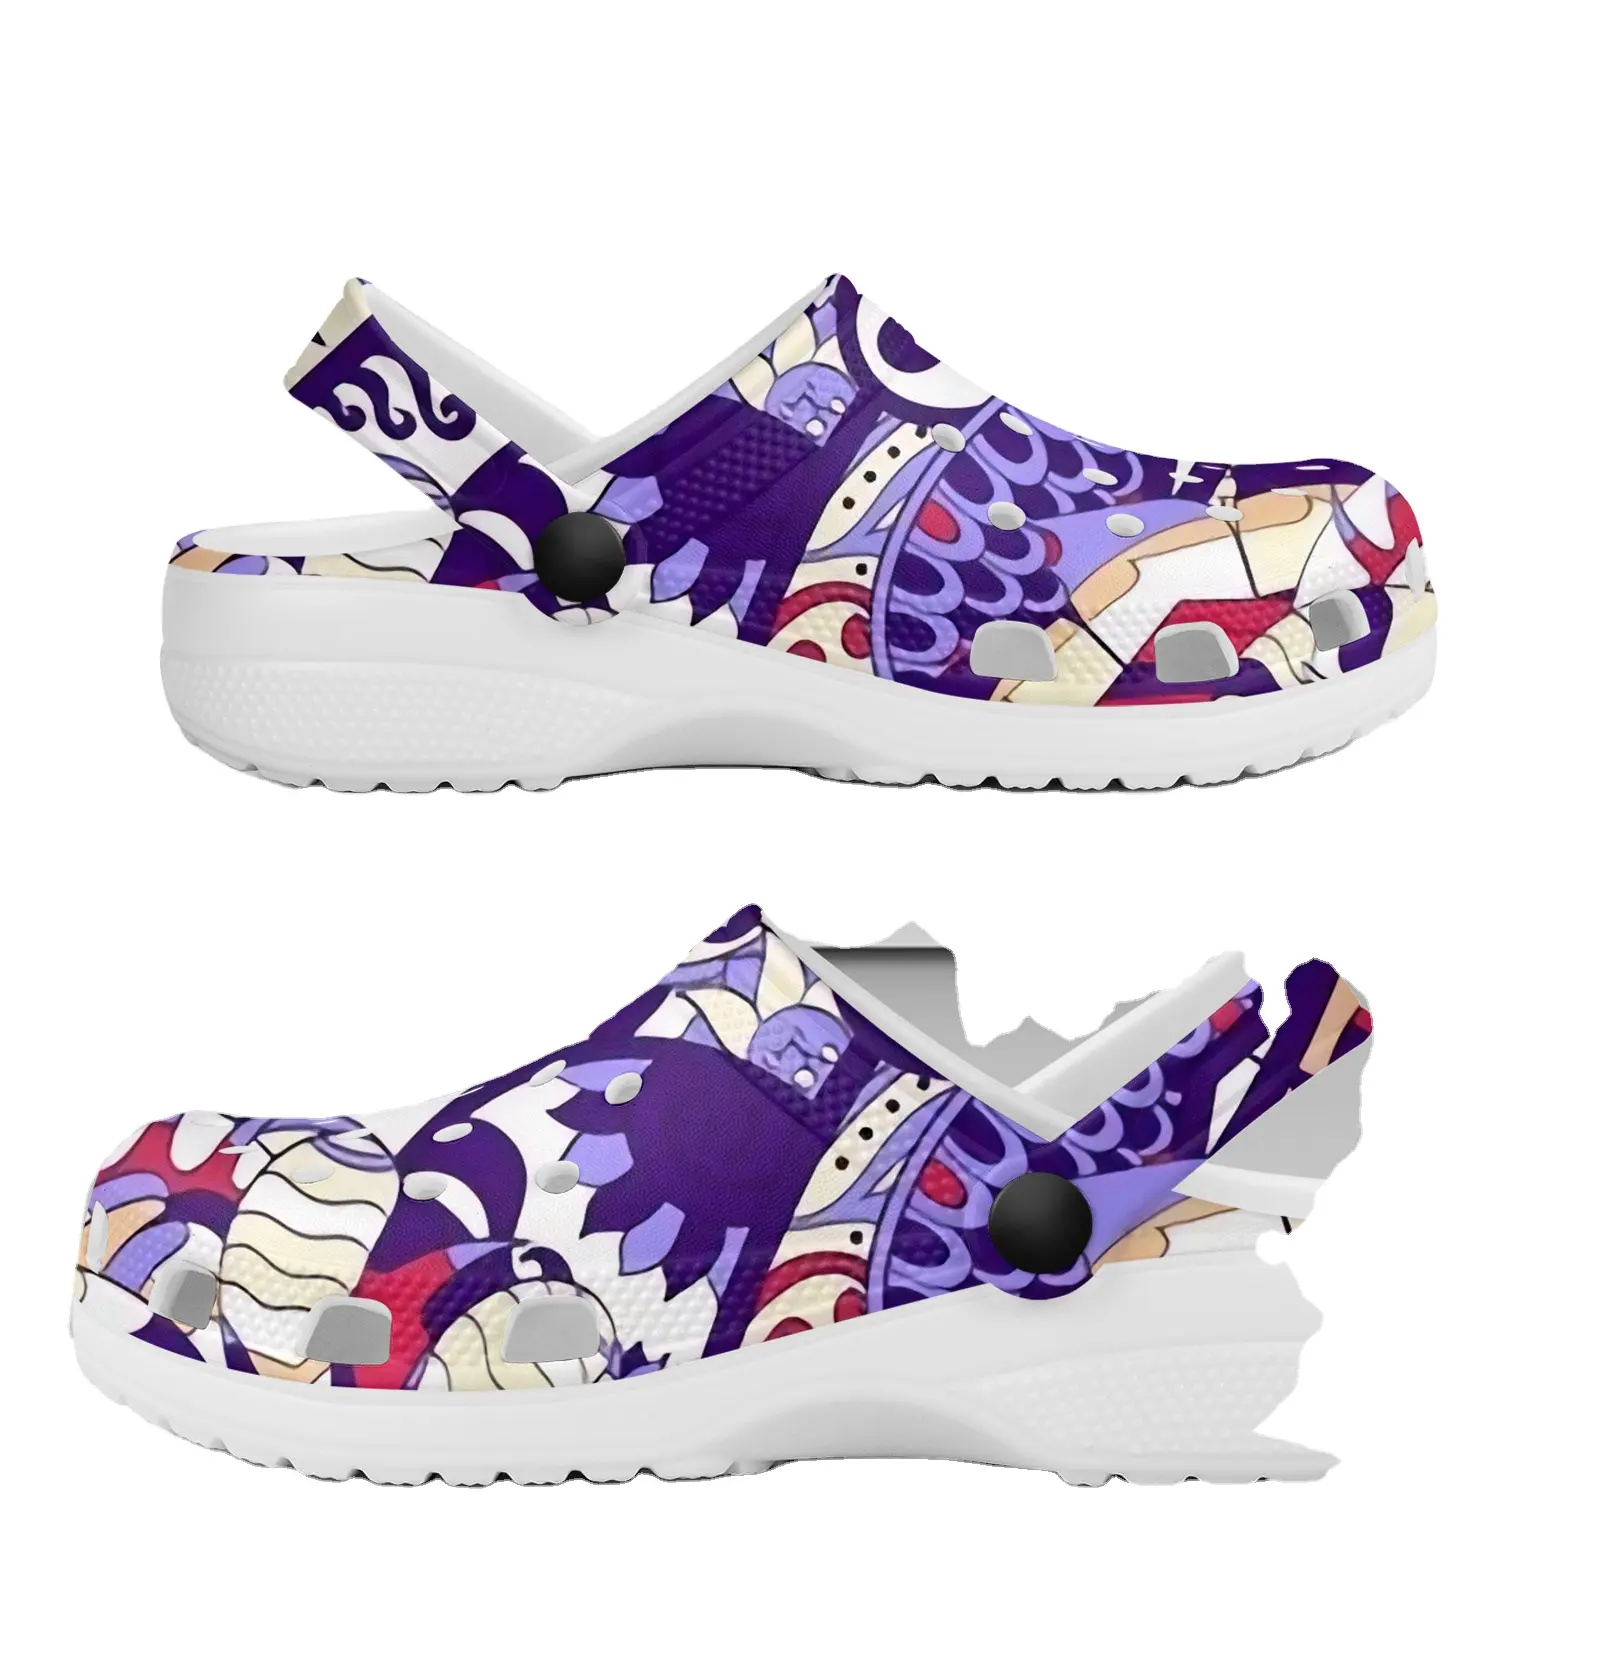 LinLong floral custom printed men's and women's couples casual shoes Baotou Cave shoes Flat slippers sandals hair replacement